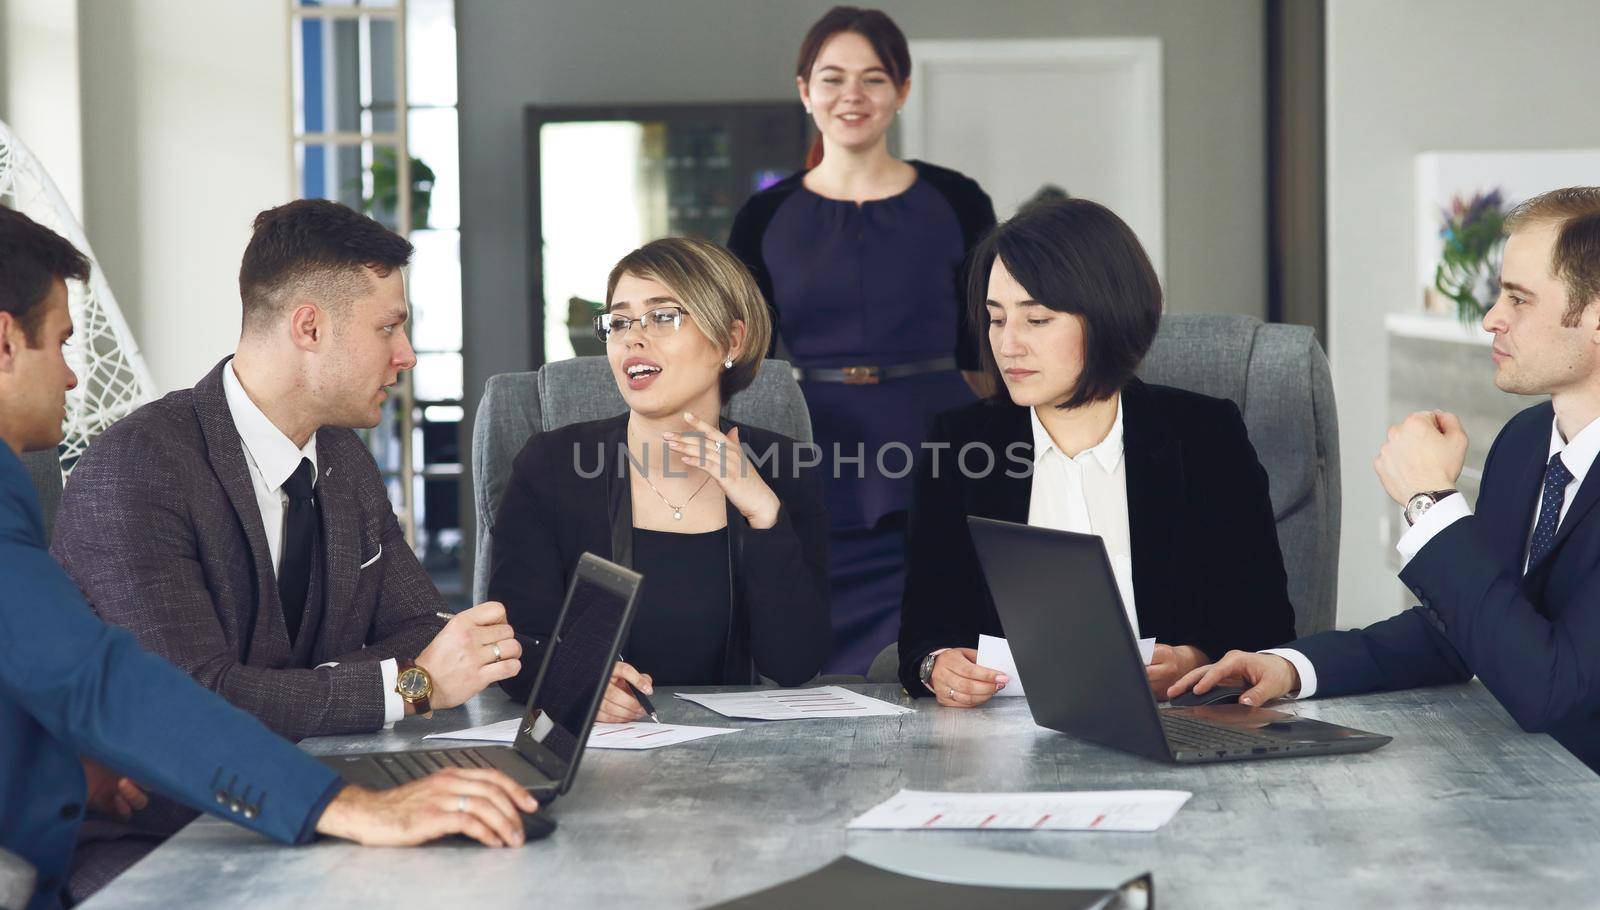 Group of young successful businessmen lawyers communicating together in a conference room while working on a project. 